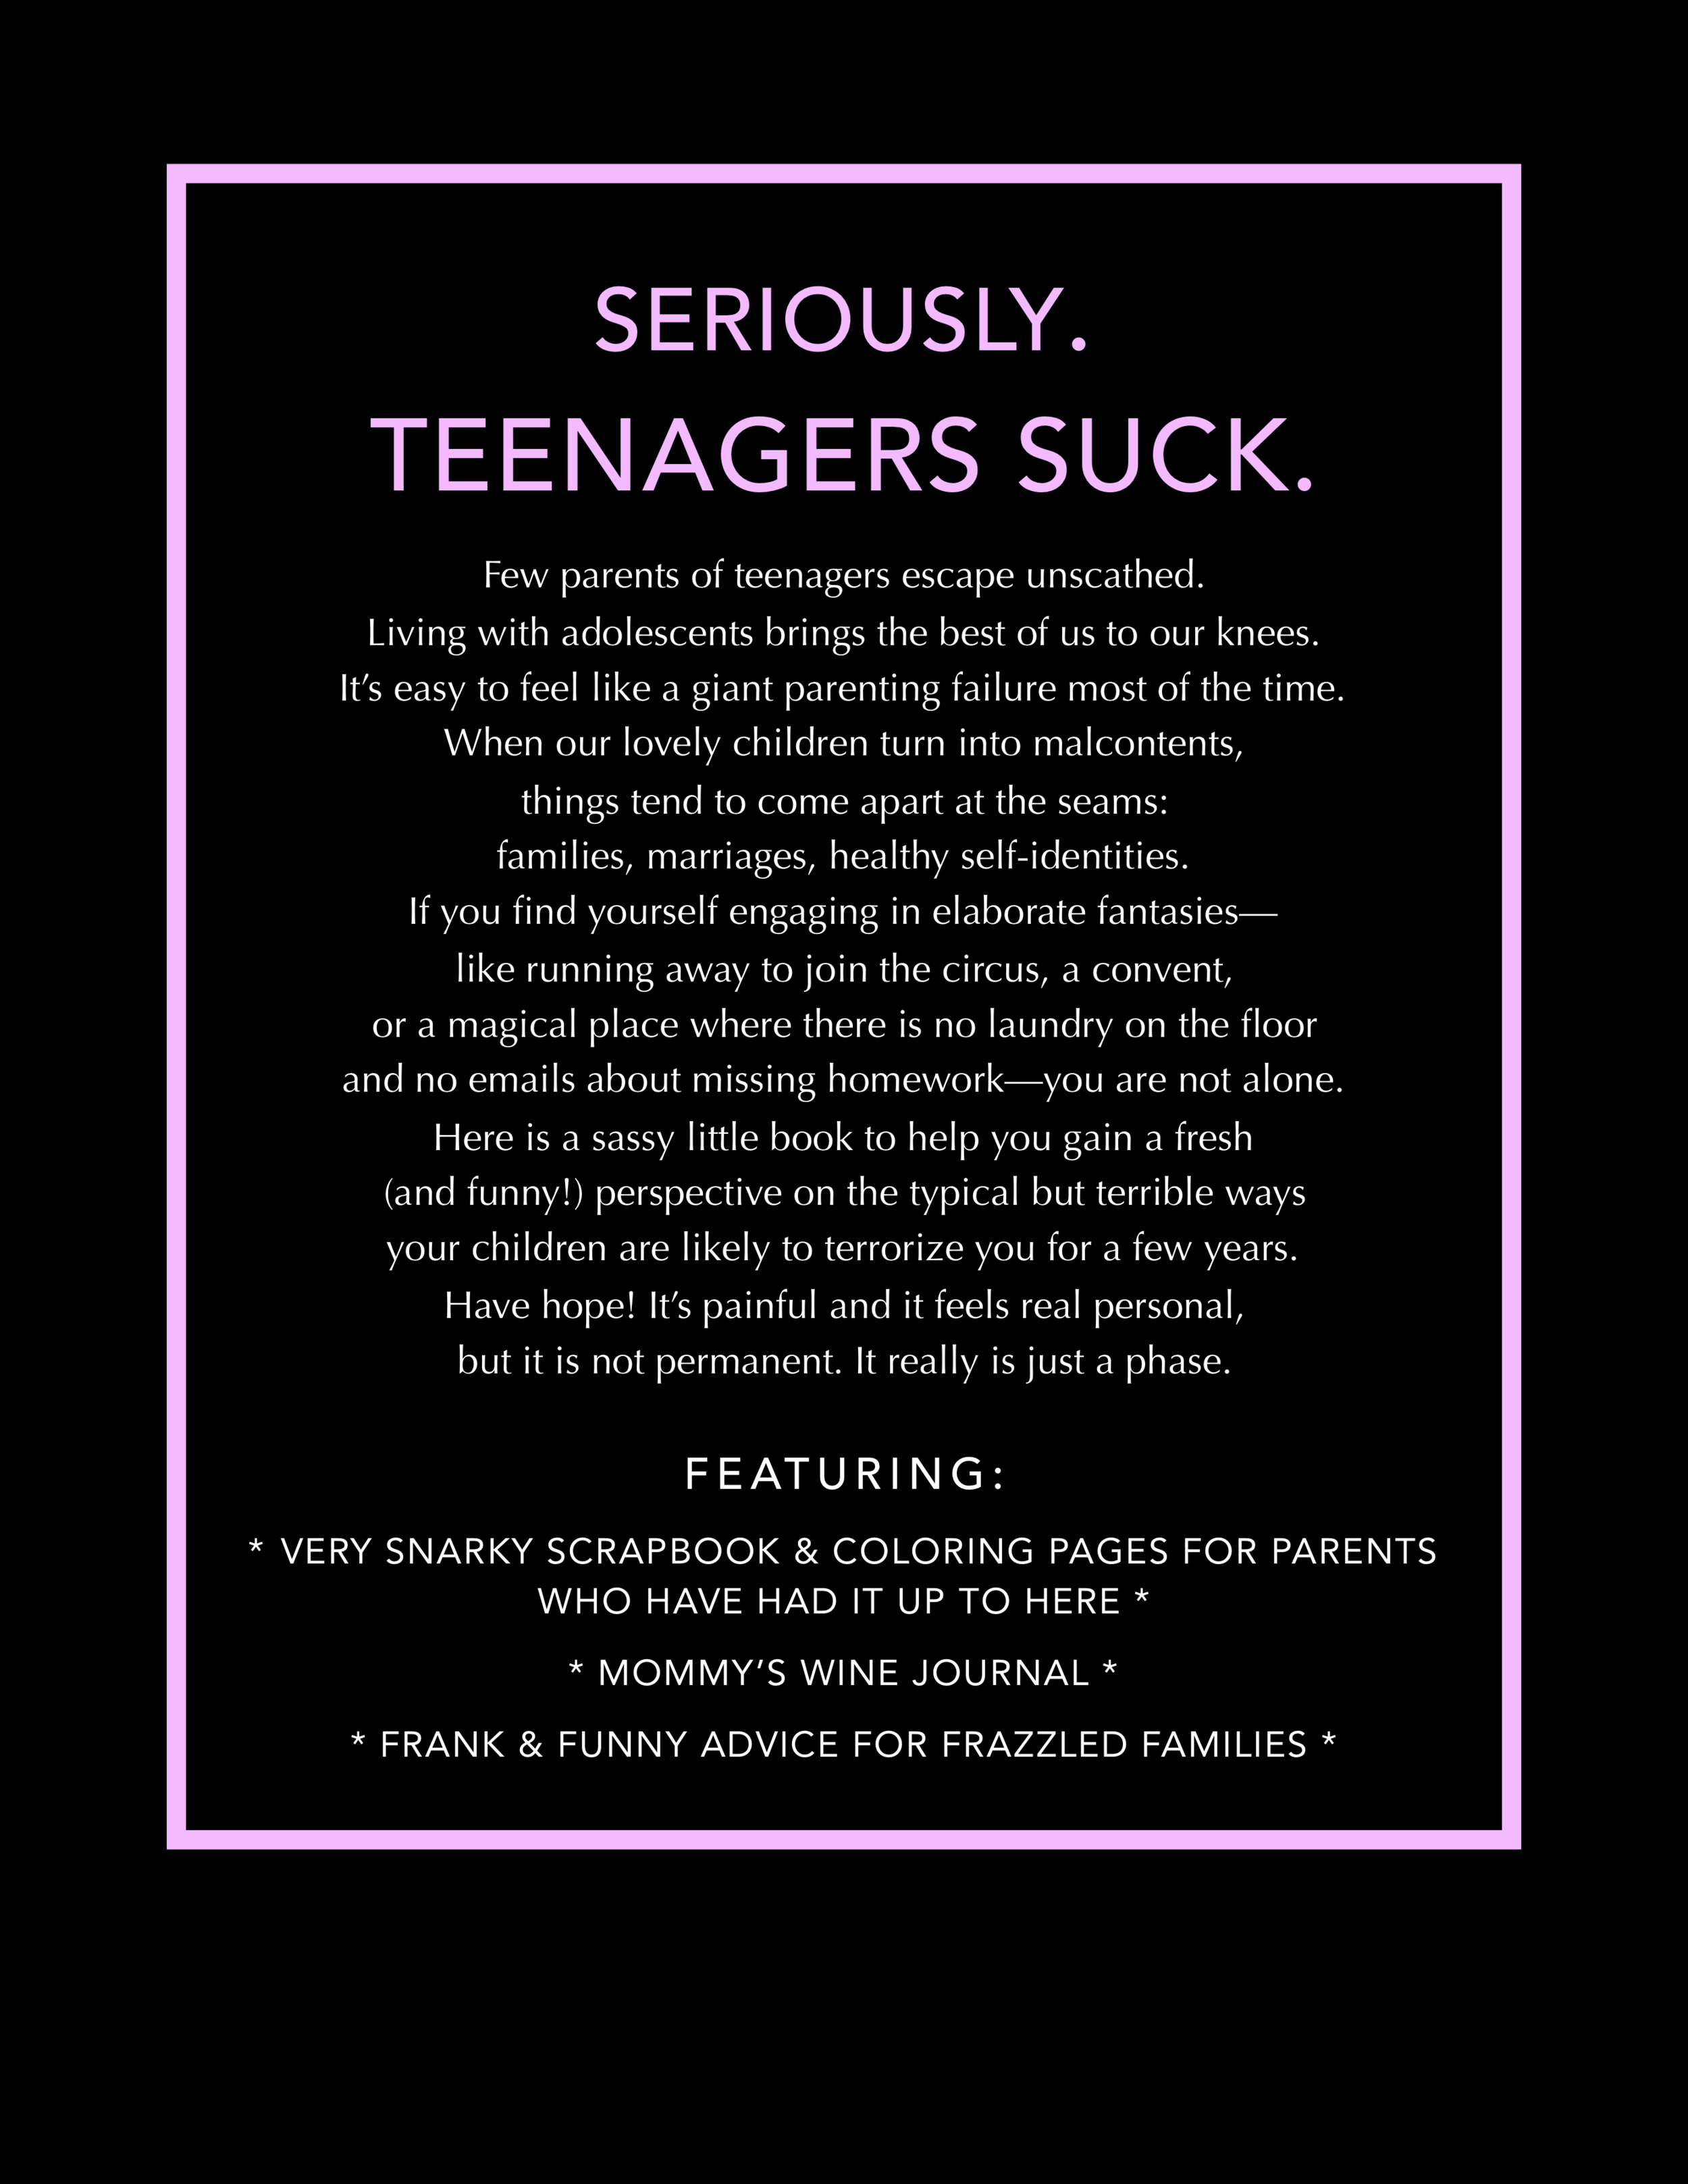 TEENAGERS SUCK back cover.png